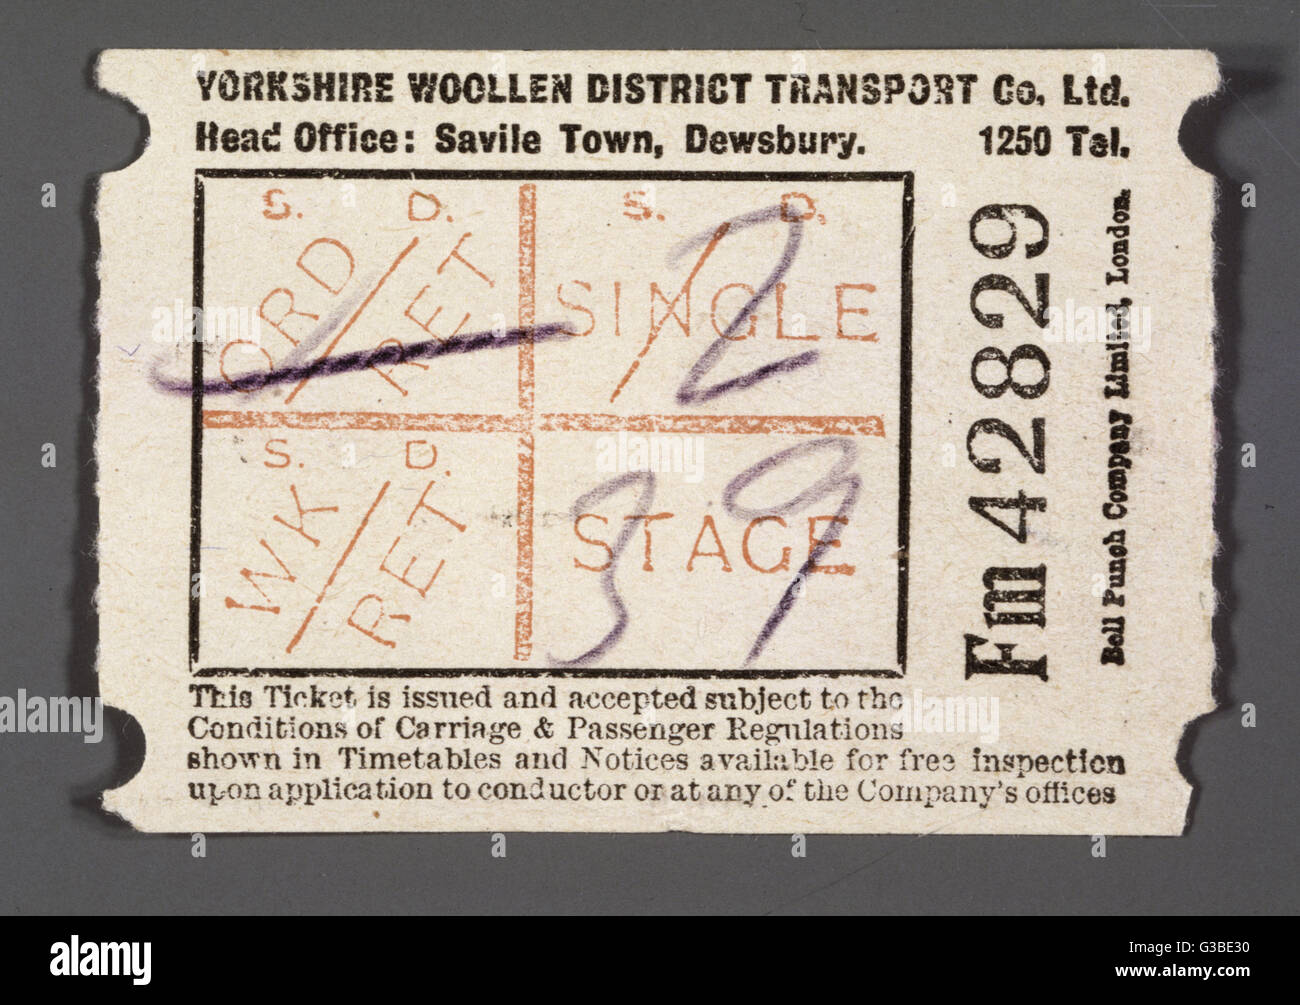 Bus ticket issued by the  YORKSHIRE WOOLLEN DISTRICT  TRANSPORT COMPANY, Dewsbury.       Date: unknown Stock Photo